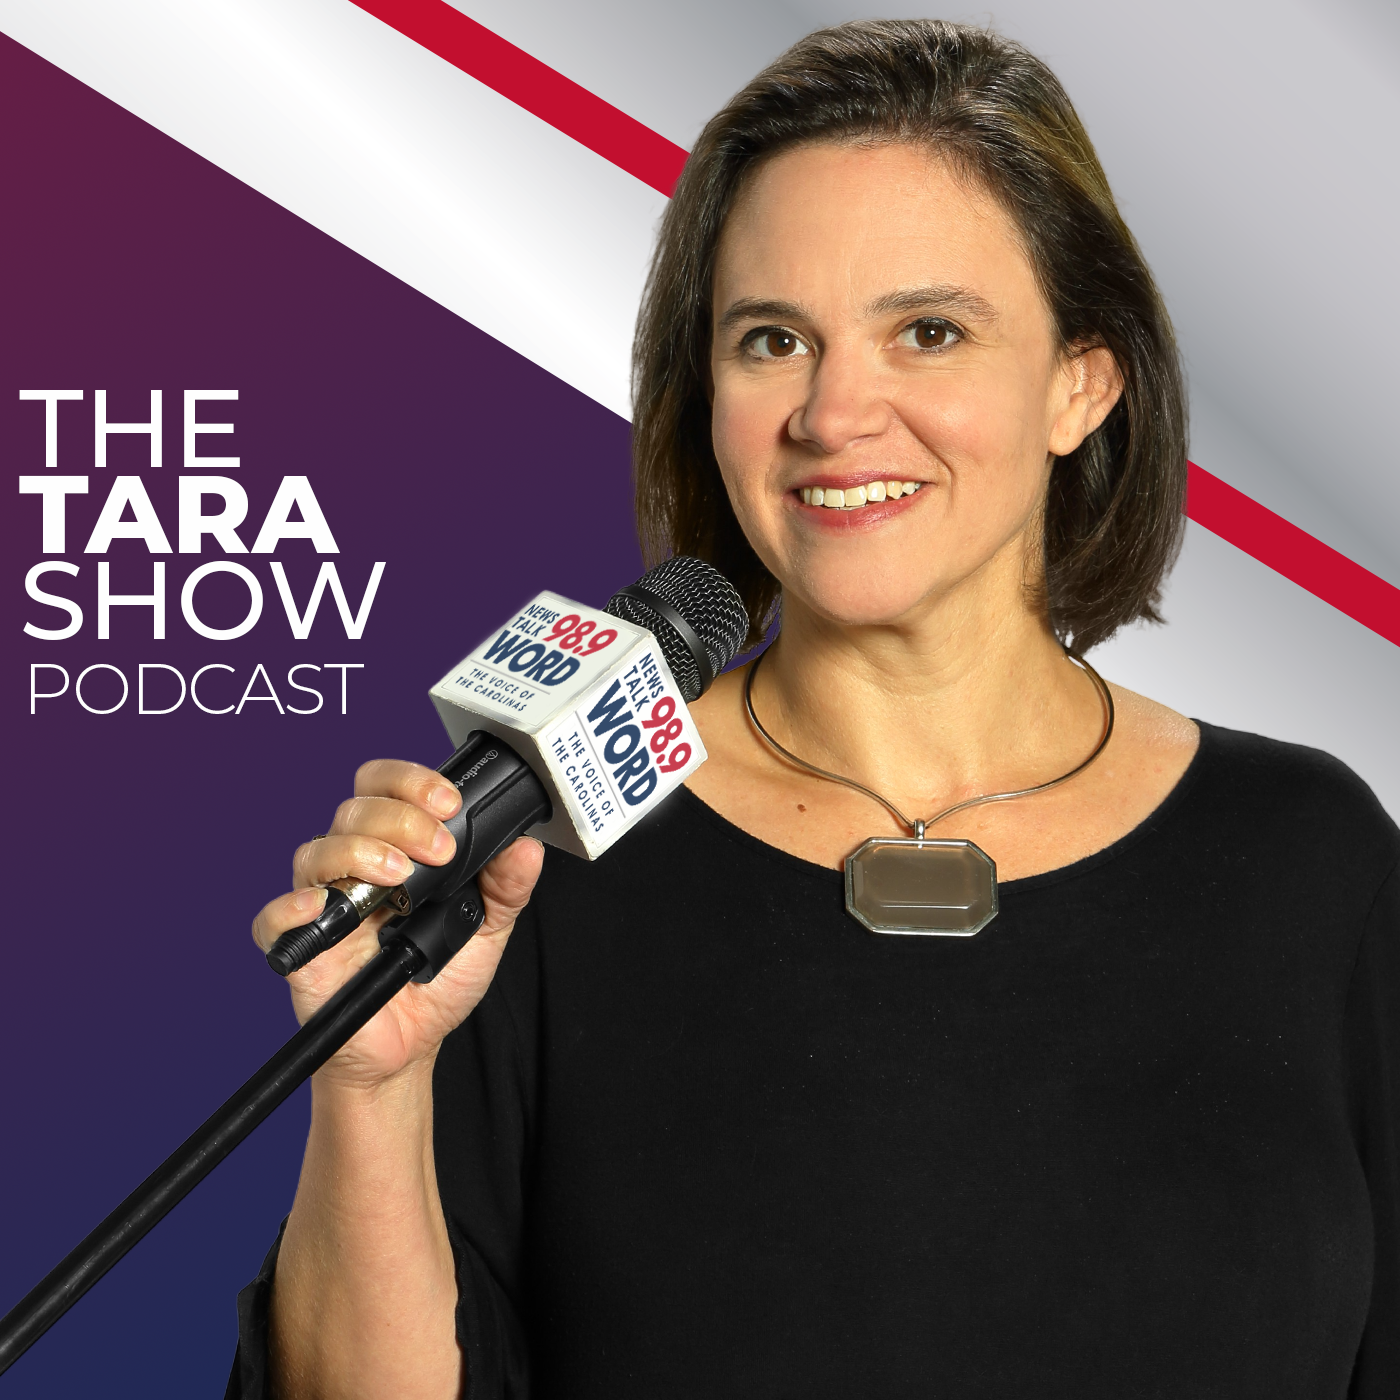 Hour 4: The Tara Show - “Education in Biden America” “Jewish Discrimination among Liberal Colleges” “Liberal Regime and Political Violence” “Now the Trail Blazers” 